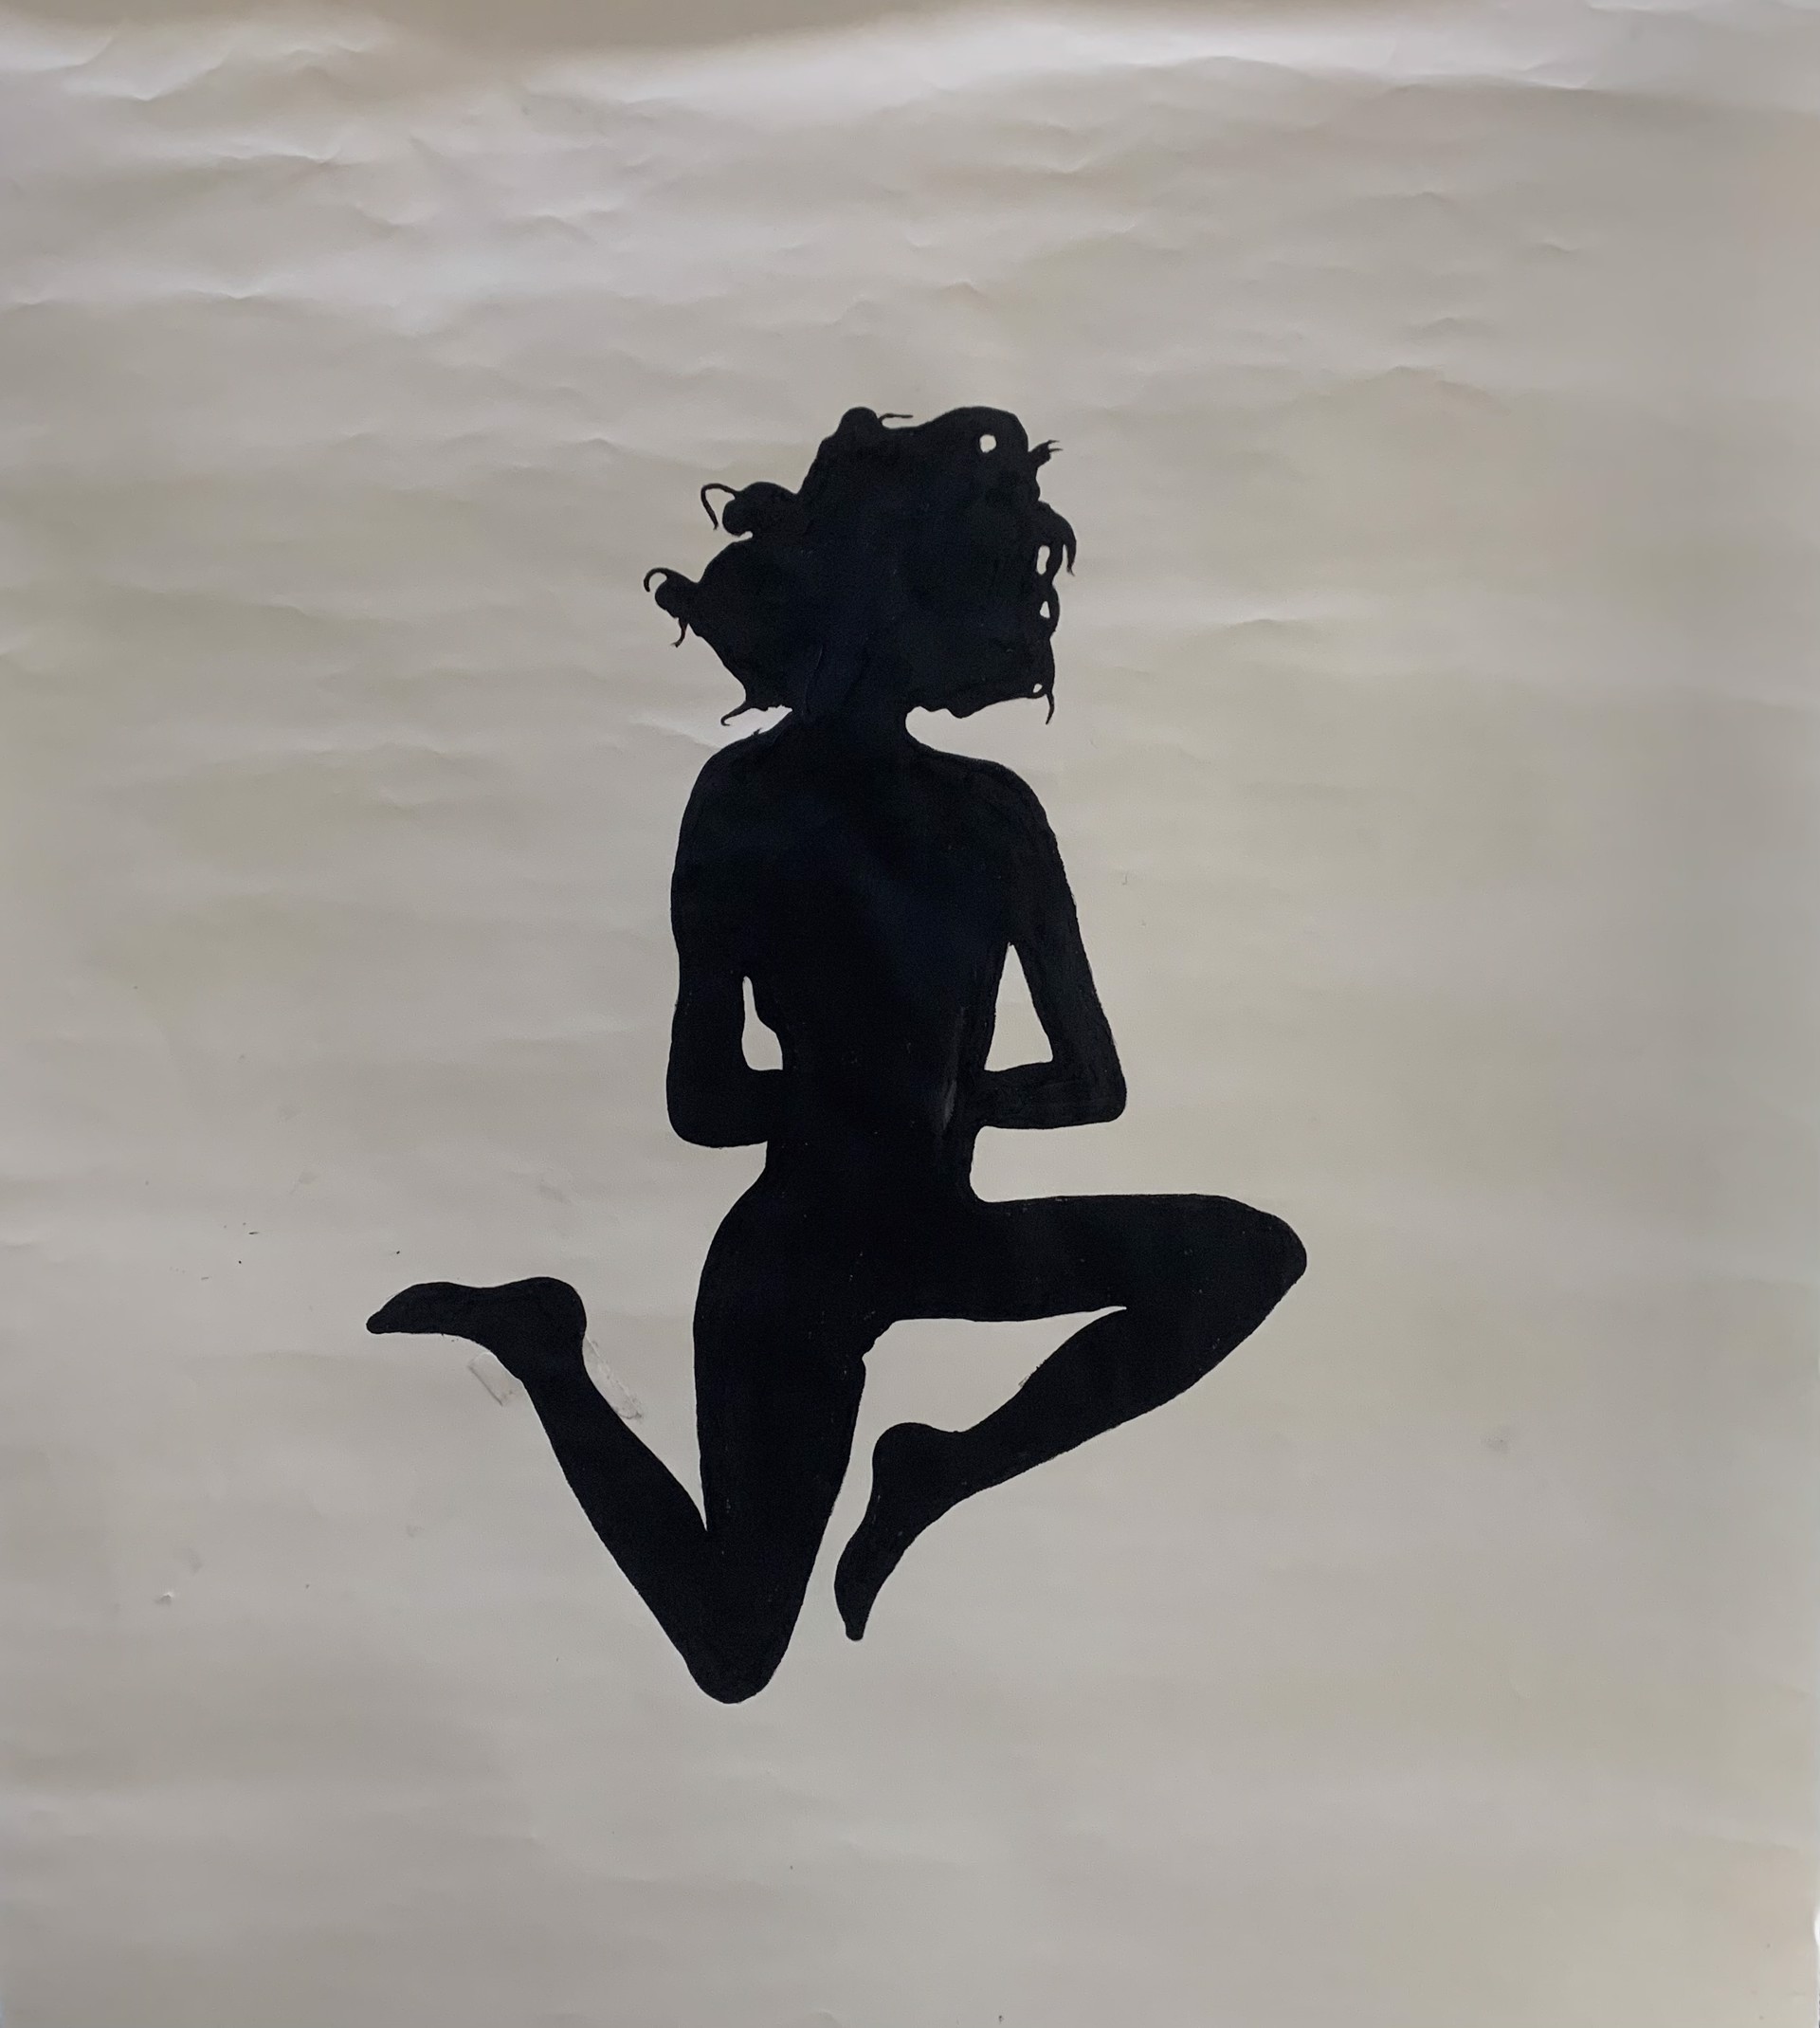 Jumping Girl (small) by Thomas Ostenberg